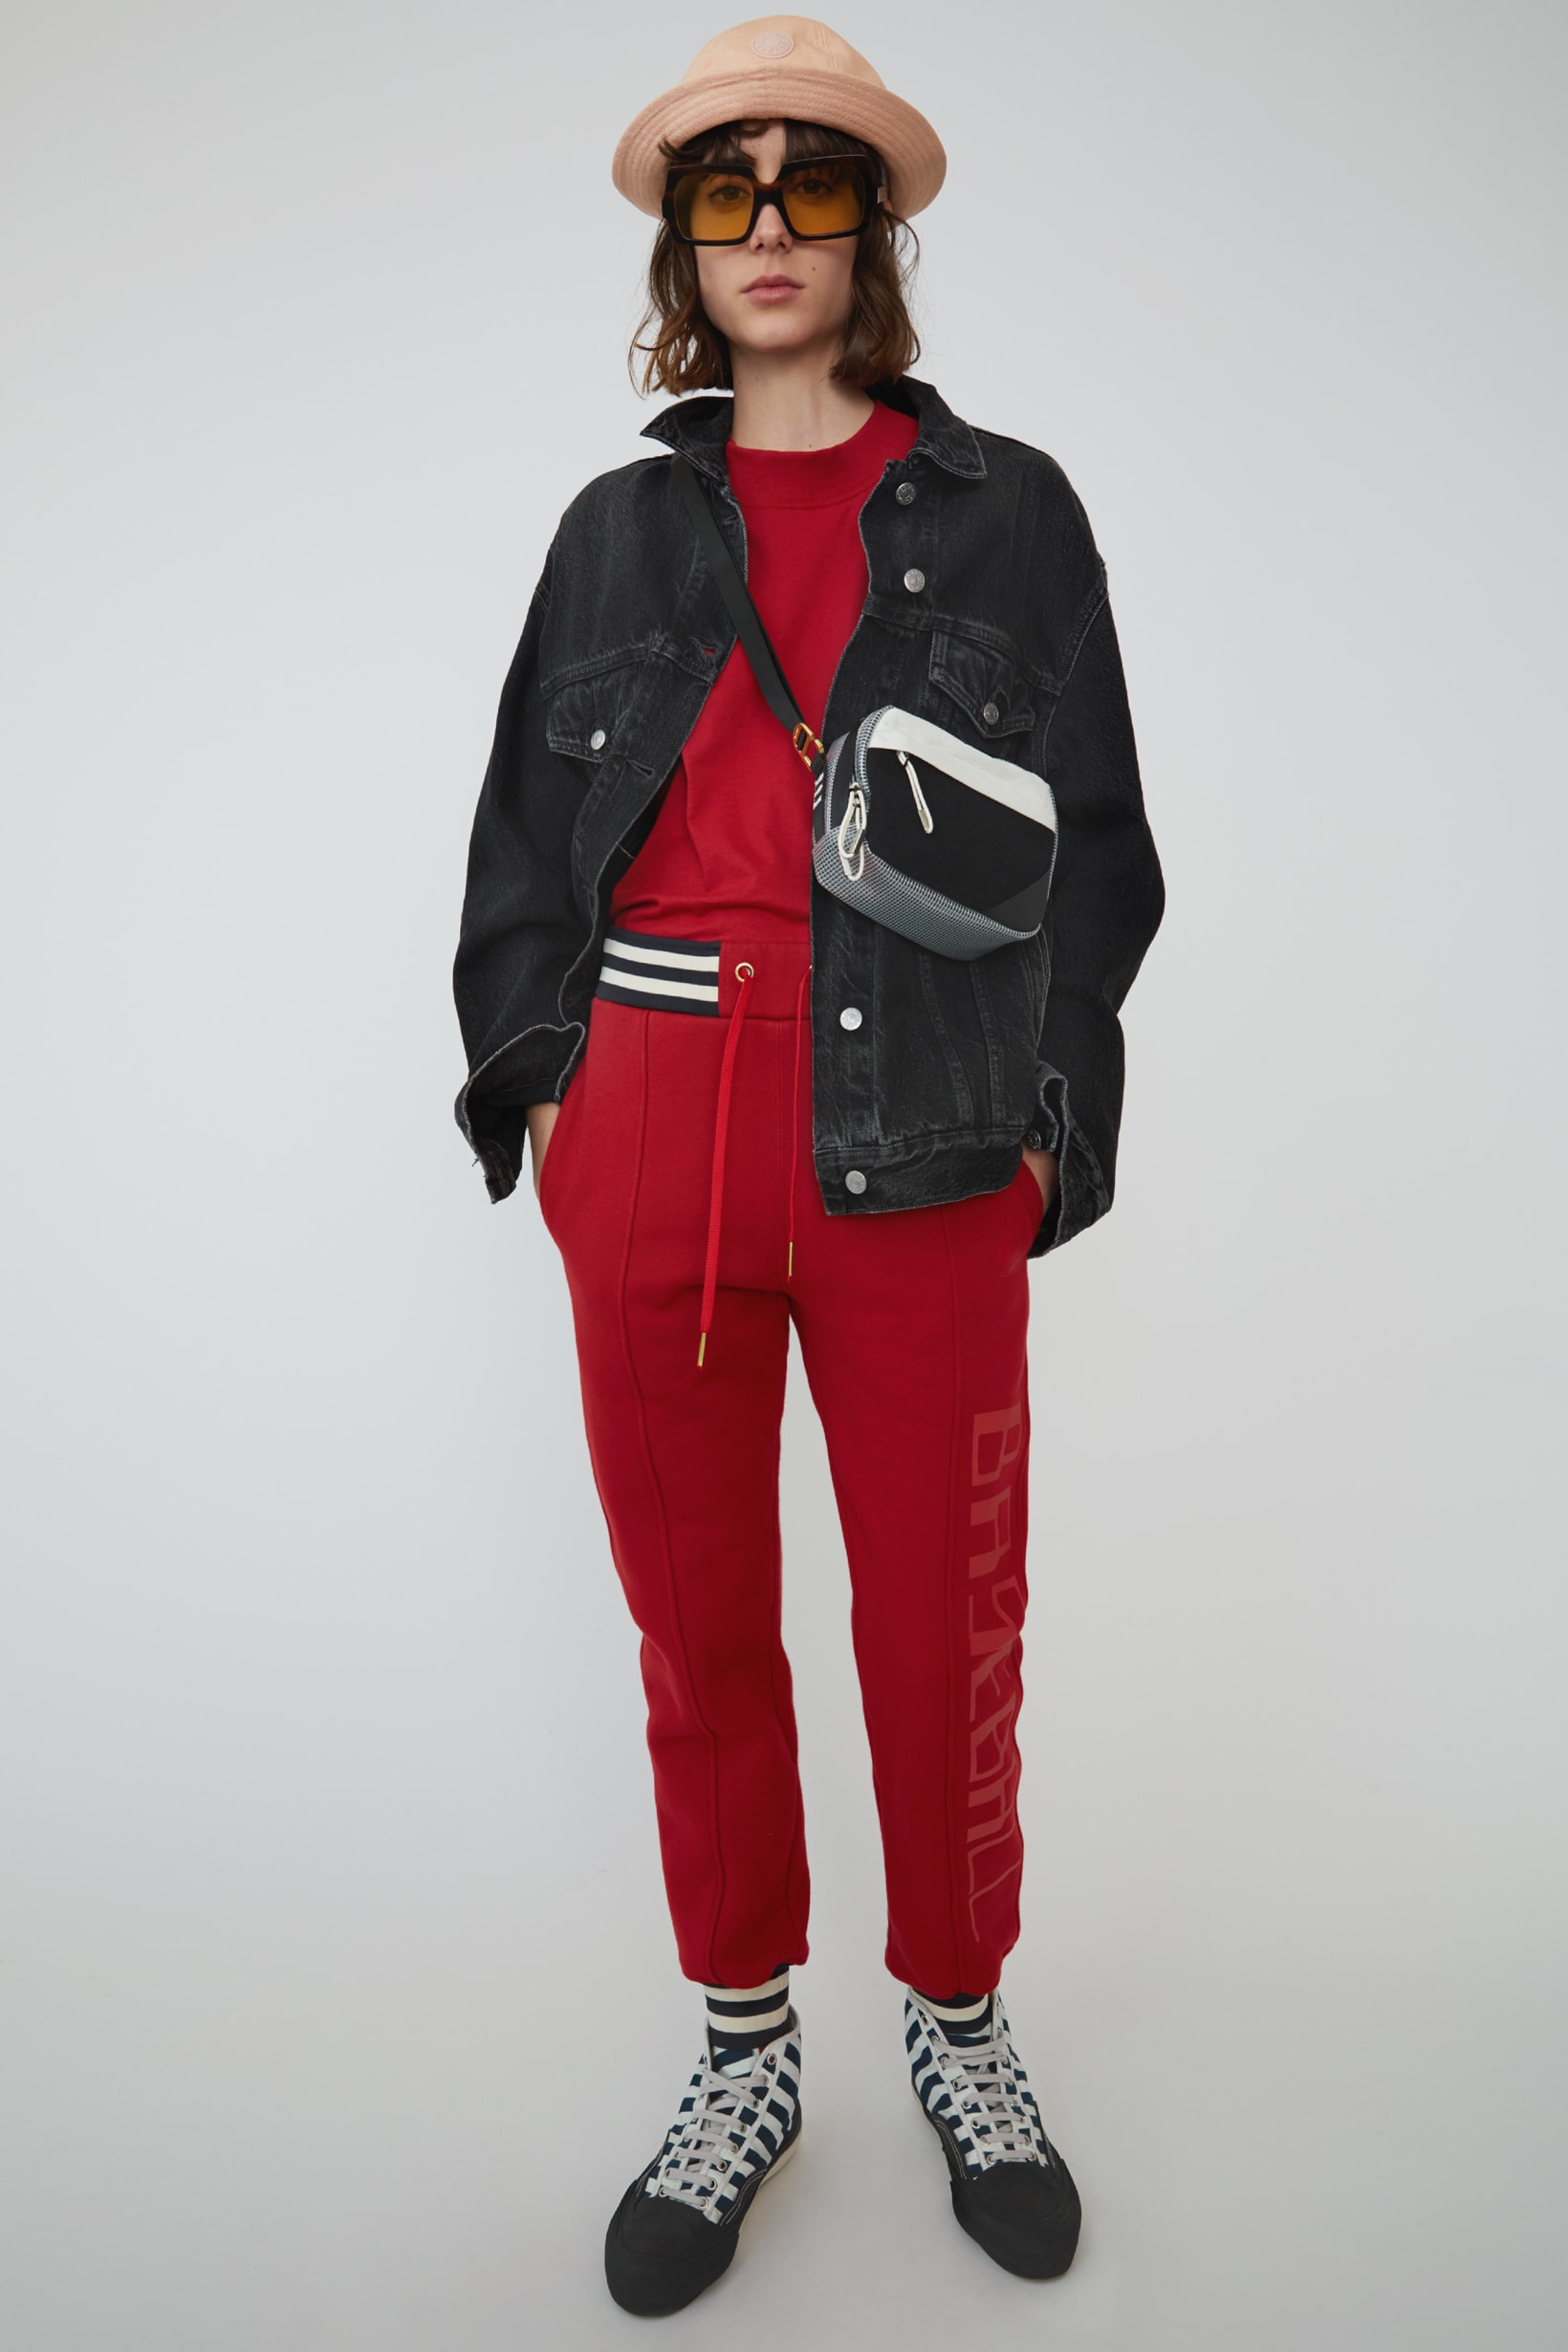 Acne Studios Spring Summer 2019 Denim Collection Jacket Blue Sweater Sweatpants Red